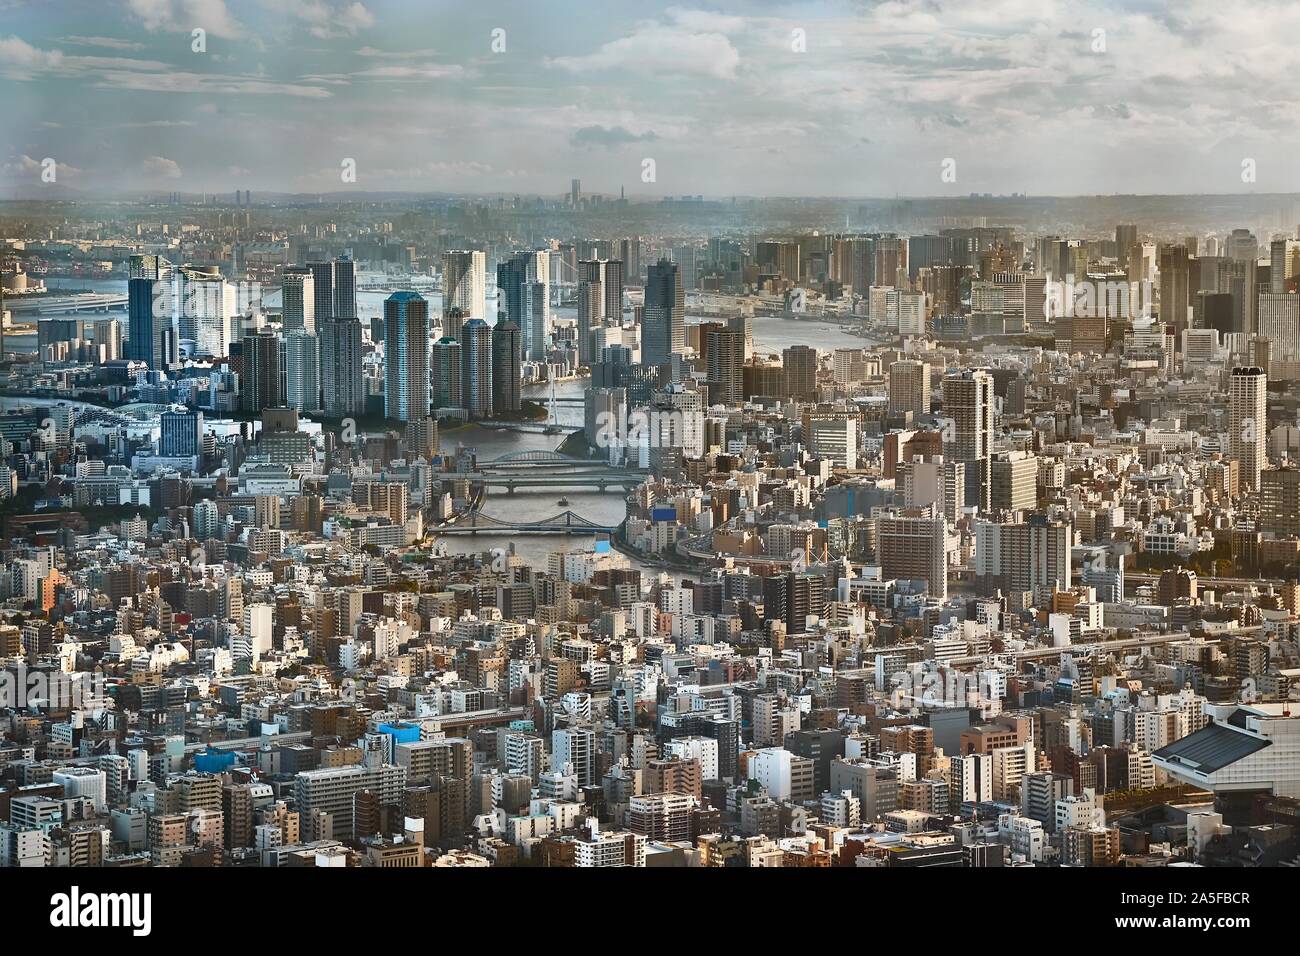 Tokyo downtown view from high above Stock Photo